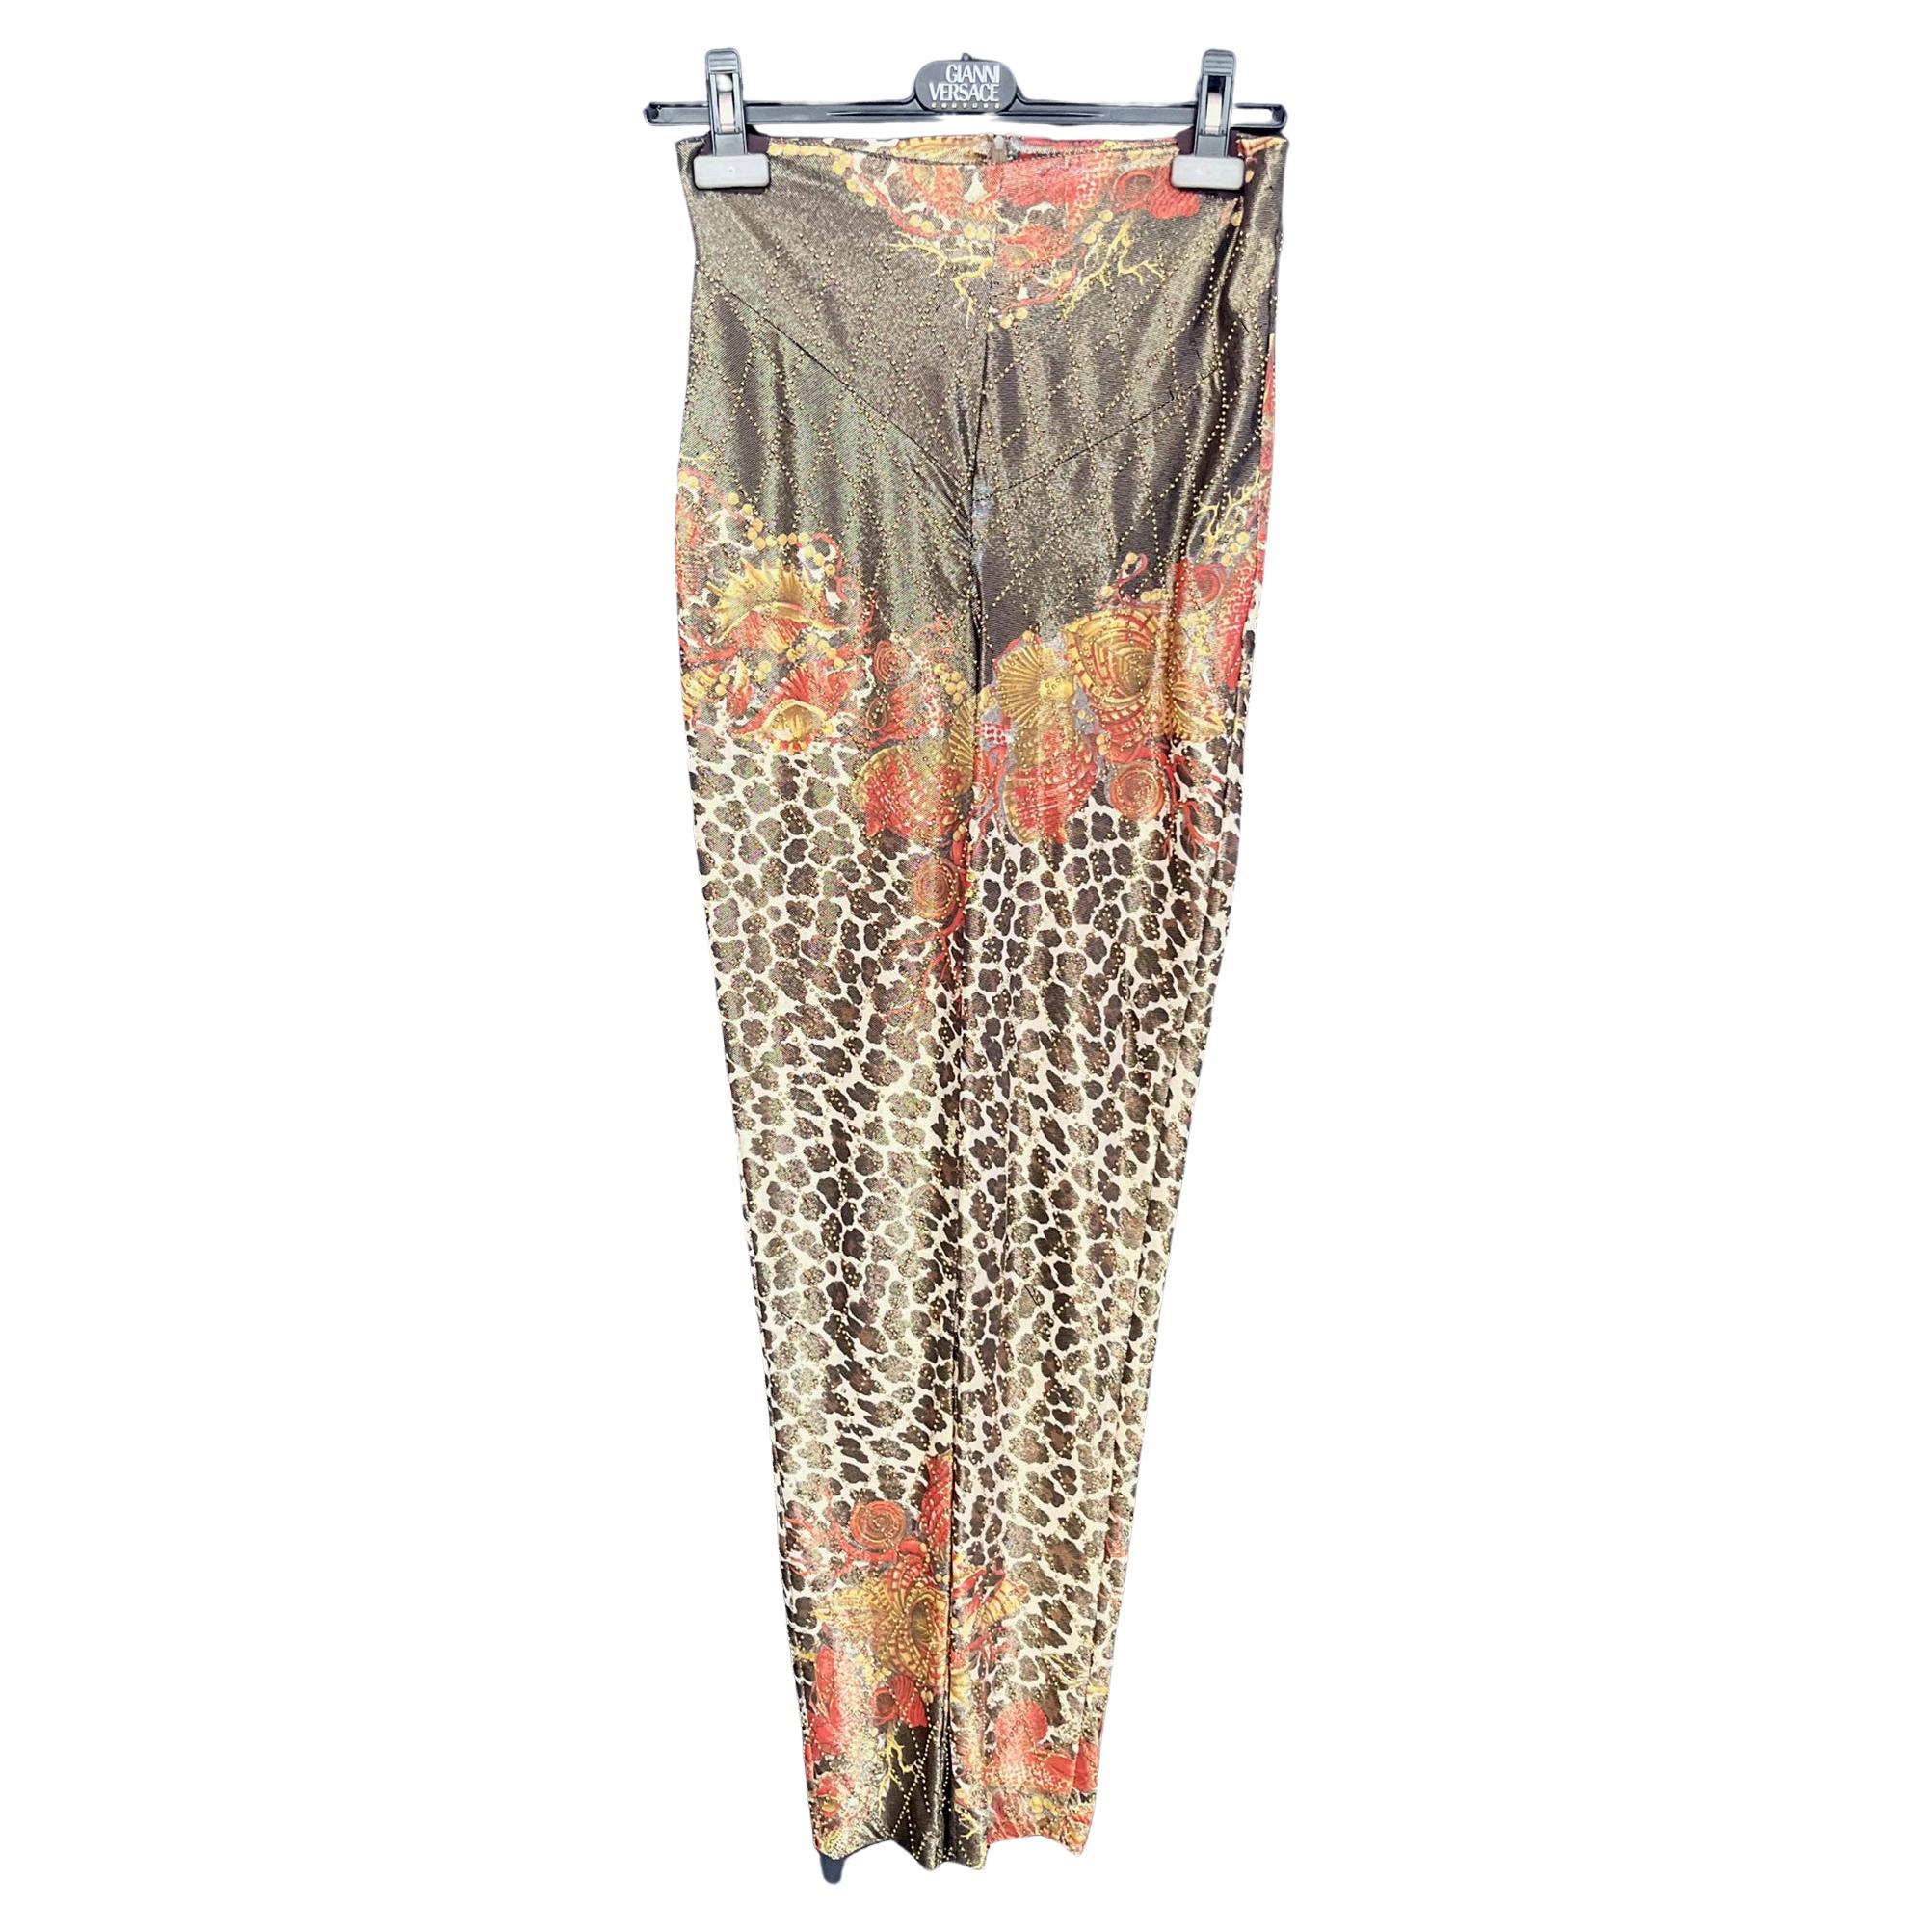 SEASHELL BAROQUE LEGGINGS from MIAMI MANSION GIANNI VERSACE PERSONAL COLLECTION For Sale